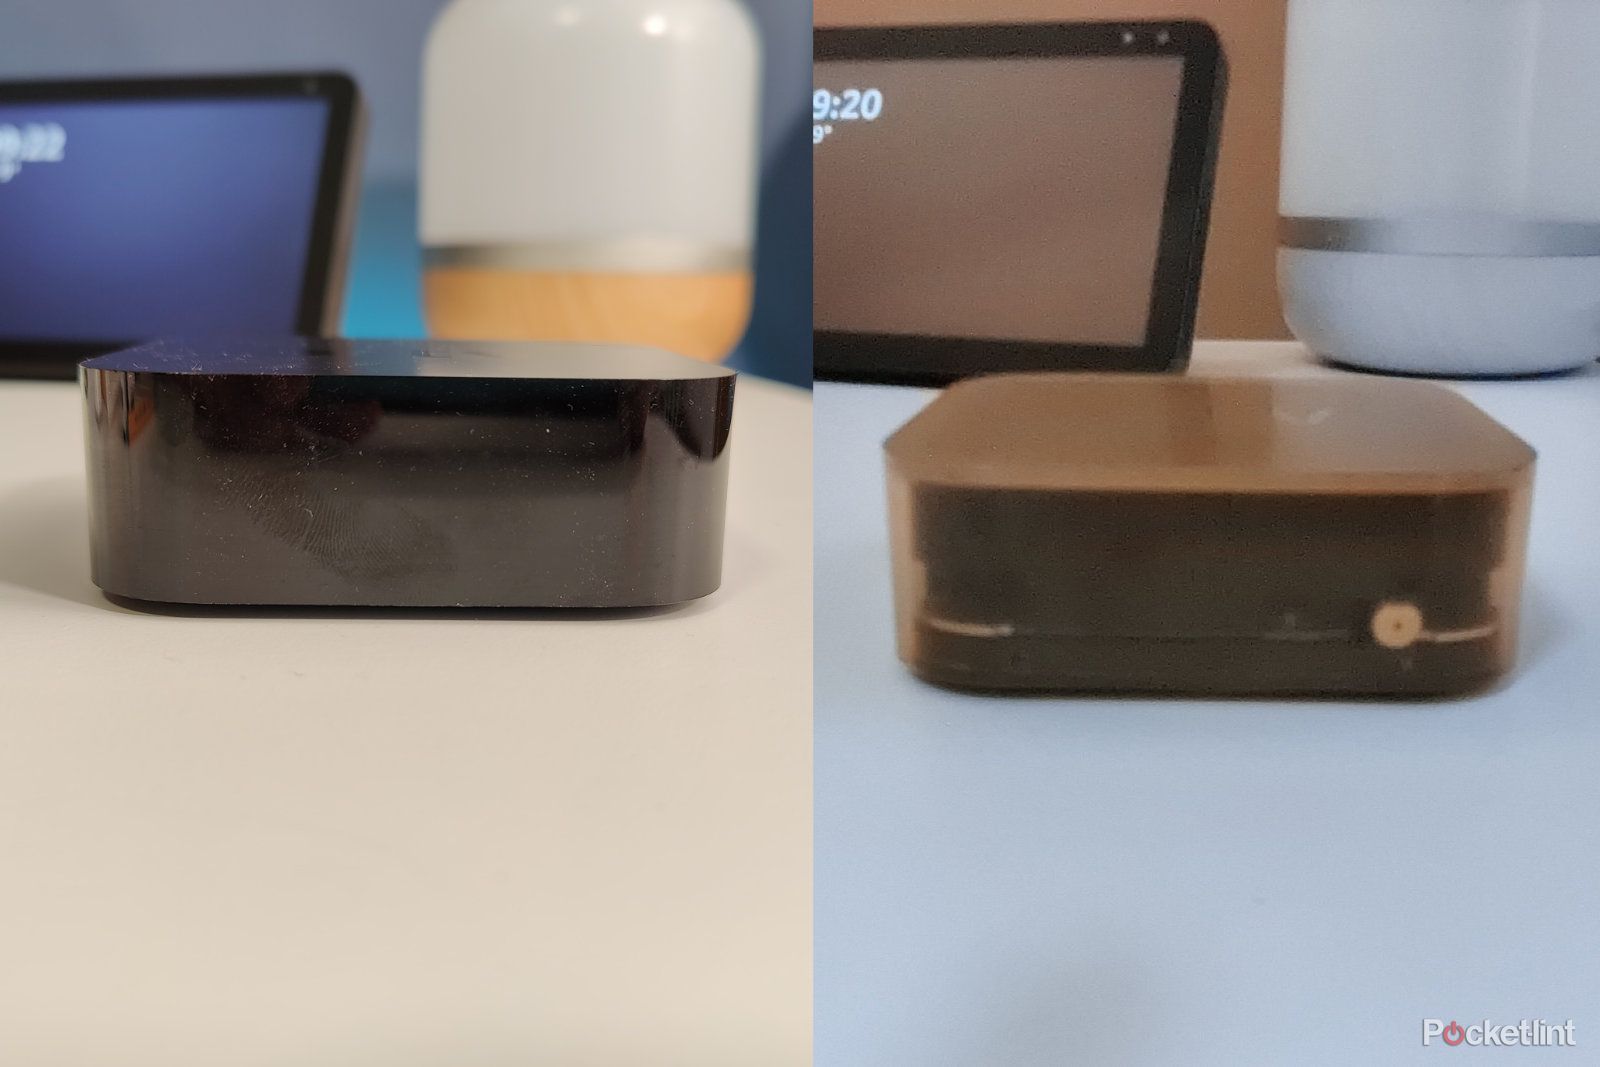 OnePlus 8 Pros colour filter camera can see through some plastic check it out image 2